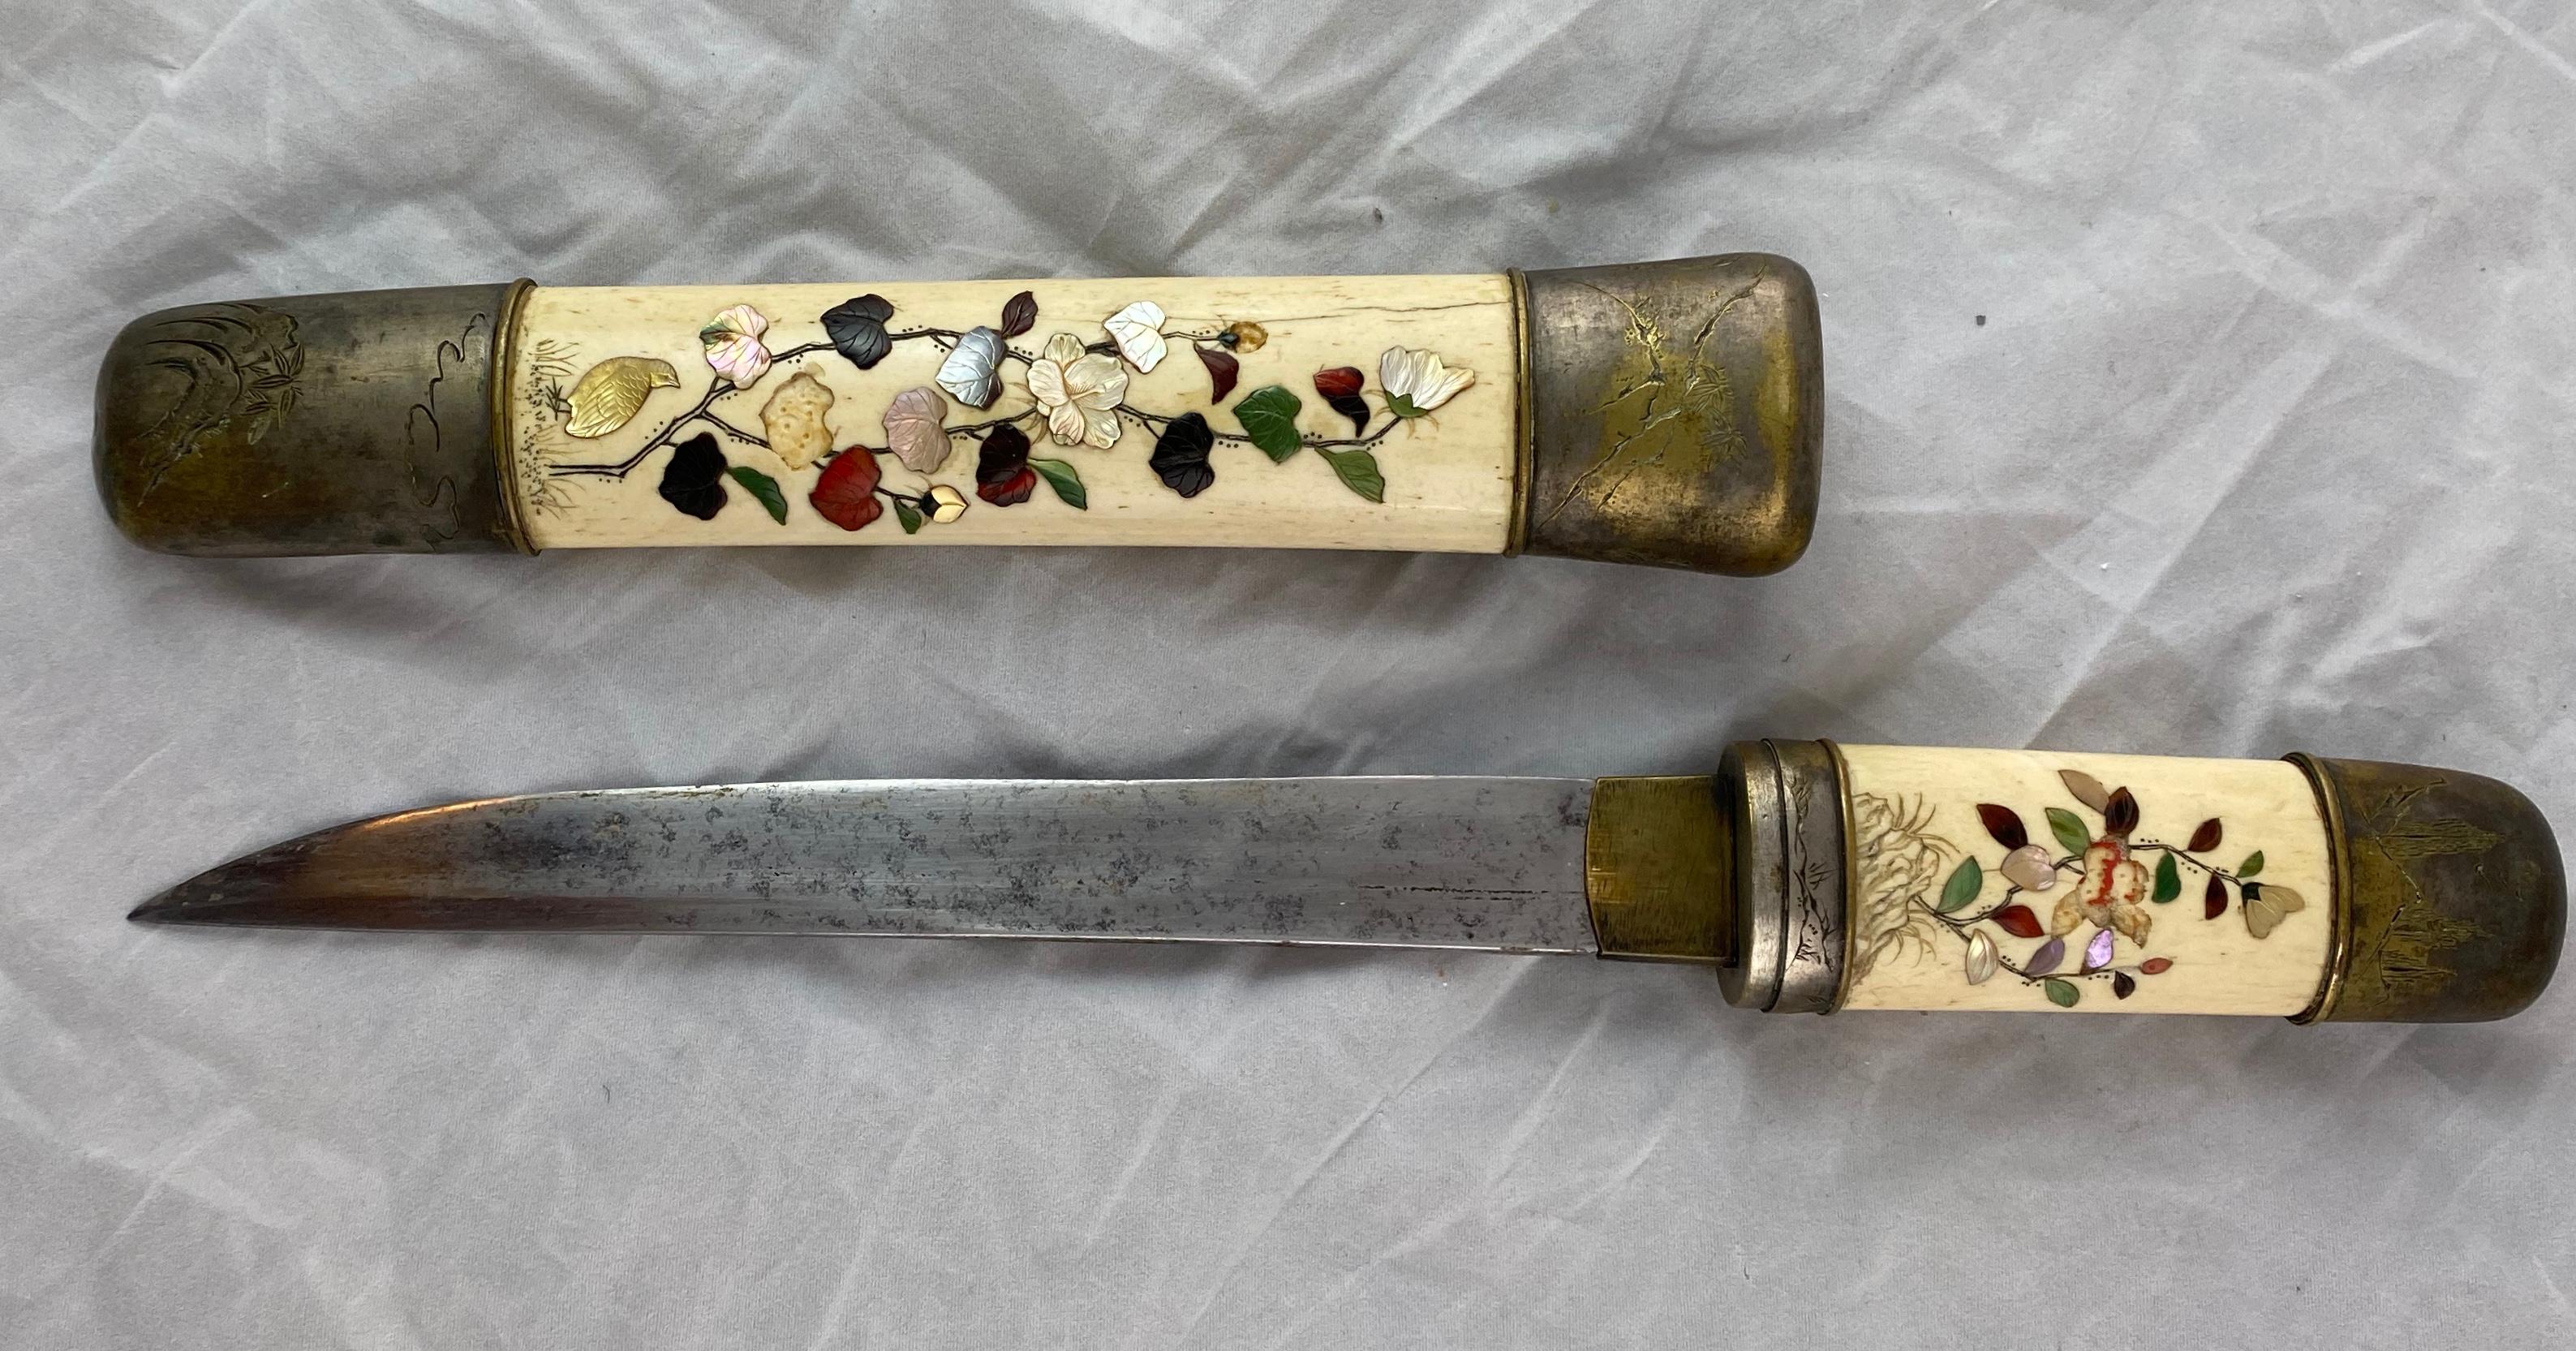 A nicely designed Japanese Tanto with a bone scabbard that has inlays of stones and mother of pearl. Motives of flowers and birds.